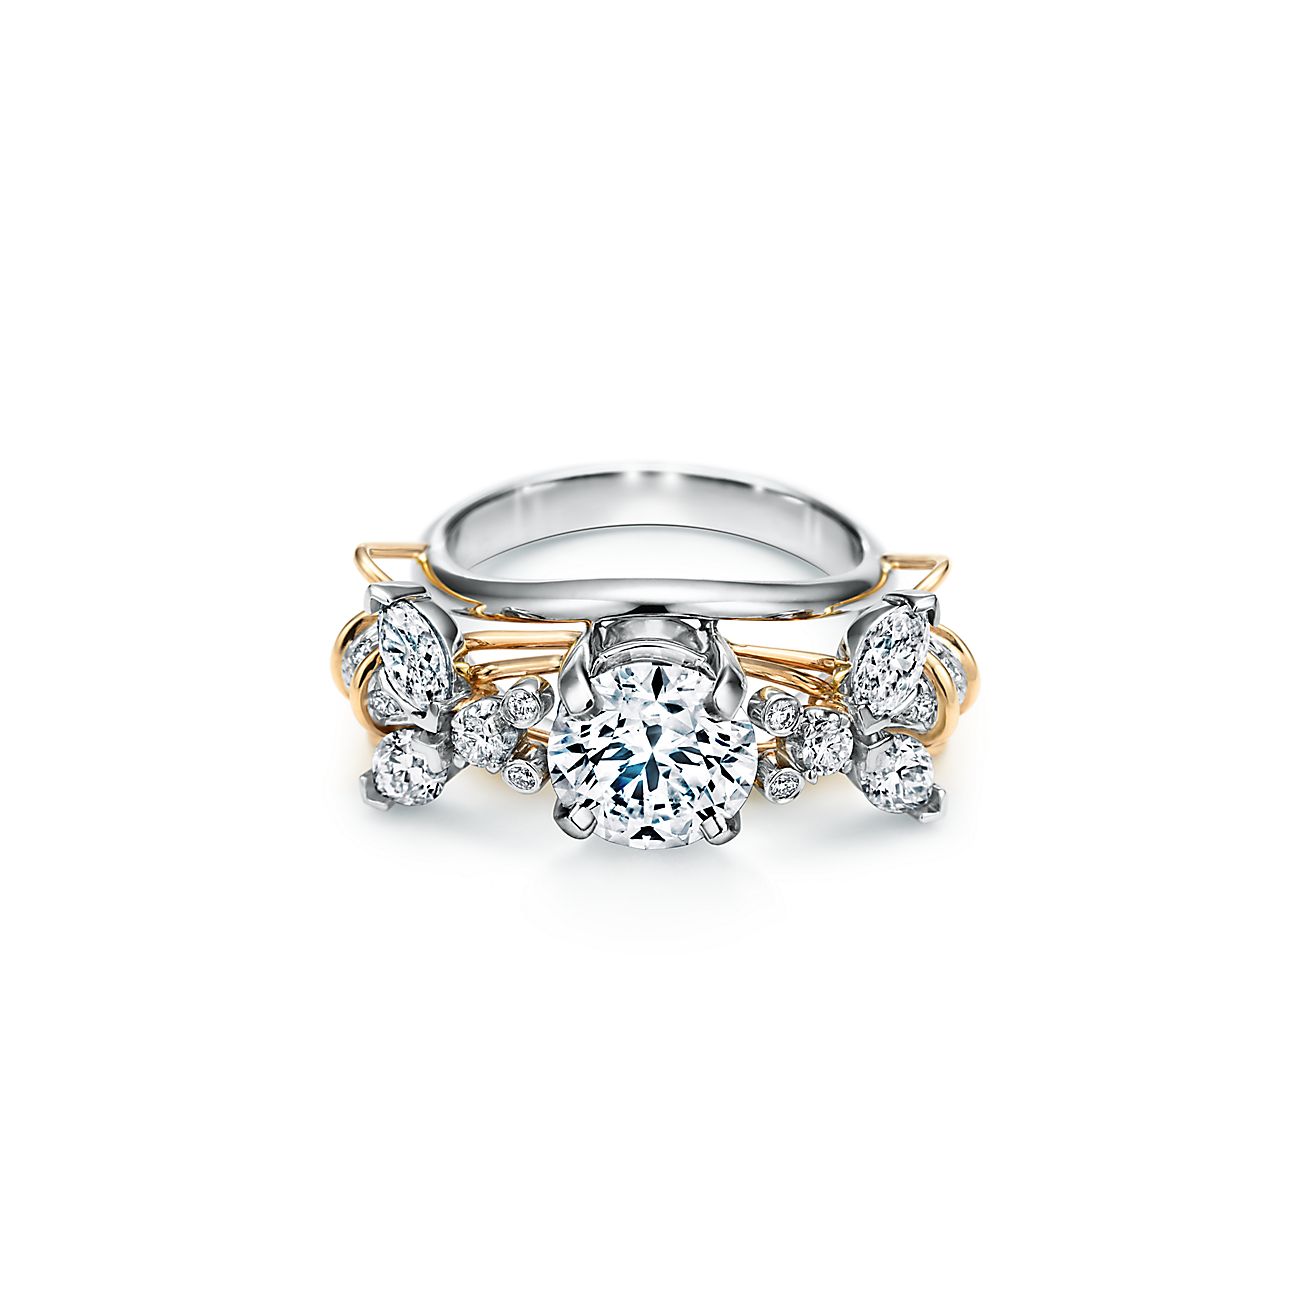 Tiffany & Co. Schlumberger Two Bees Engagement Ring In Platinum And 18K  Gold. | Tiffany & Co.